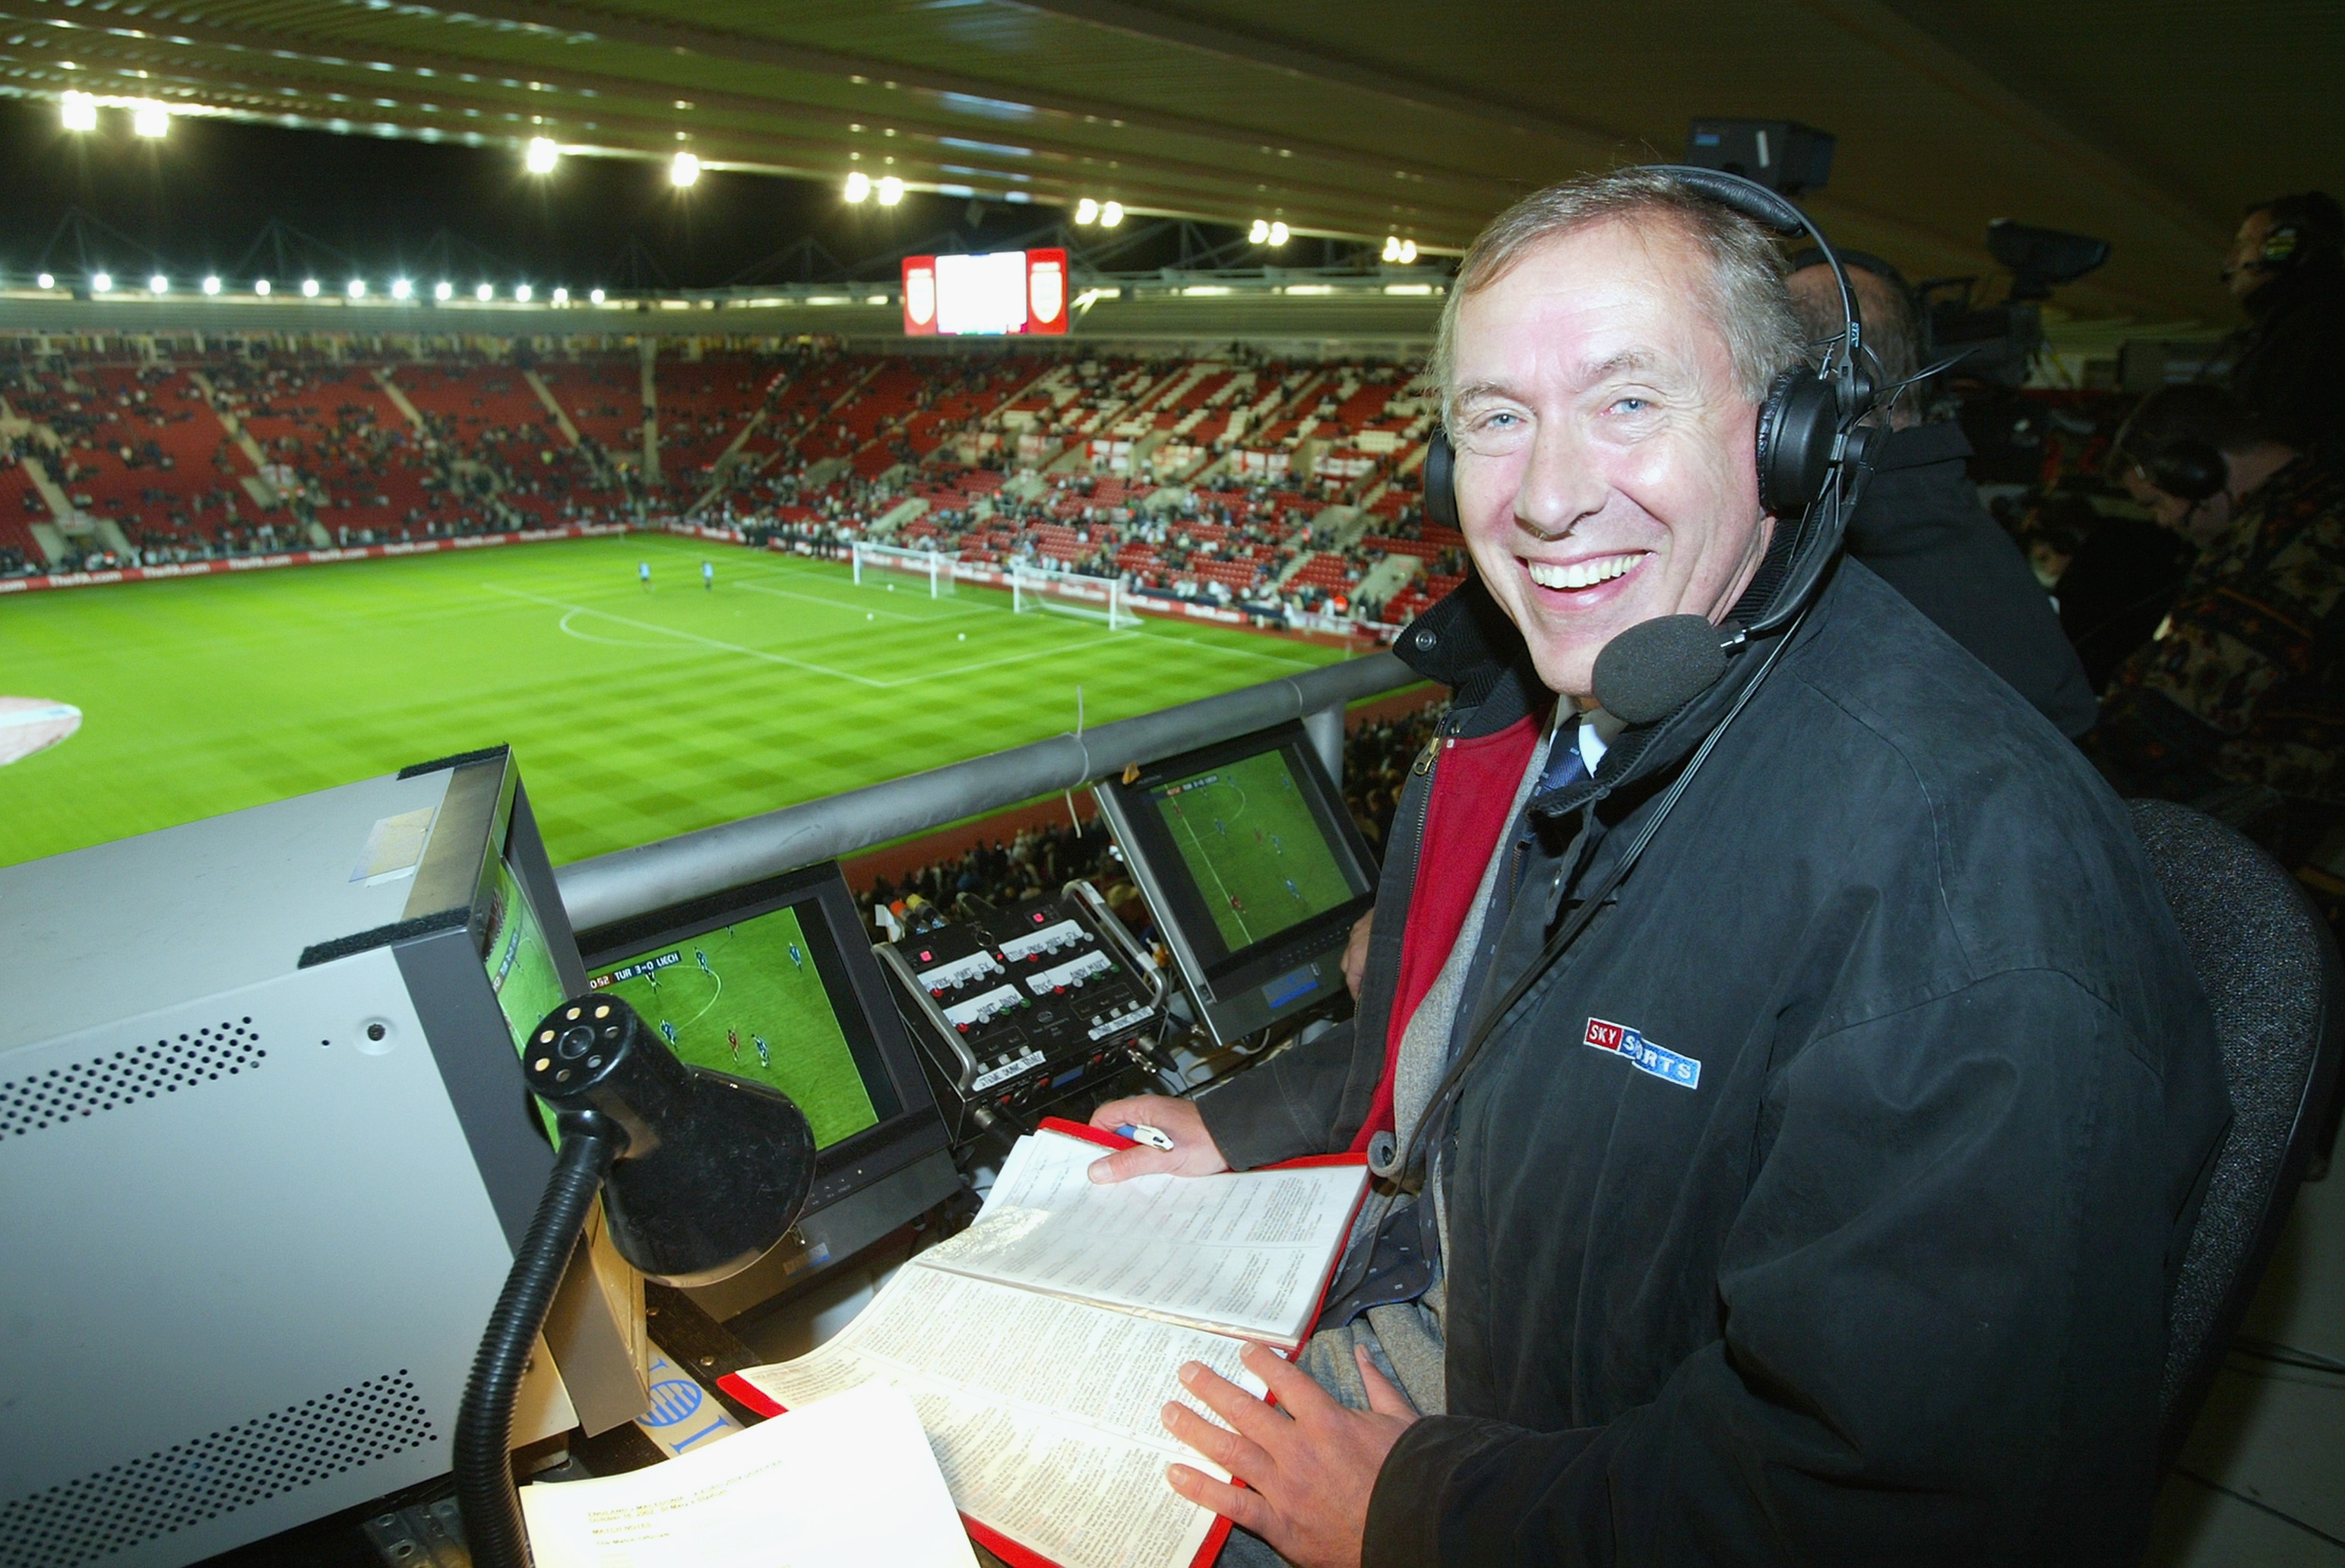 SOUTHAMPTON - OCTOBER 16:  Sky television commentator Martin Tyler in the commentary boxbefore the Euro 2004 Championship Qualifying match between England and Macedonia on October 16, 2002 at St. Mary's Stadium in Southampton, England. (Photo by Mike Hewi